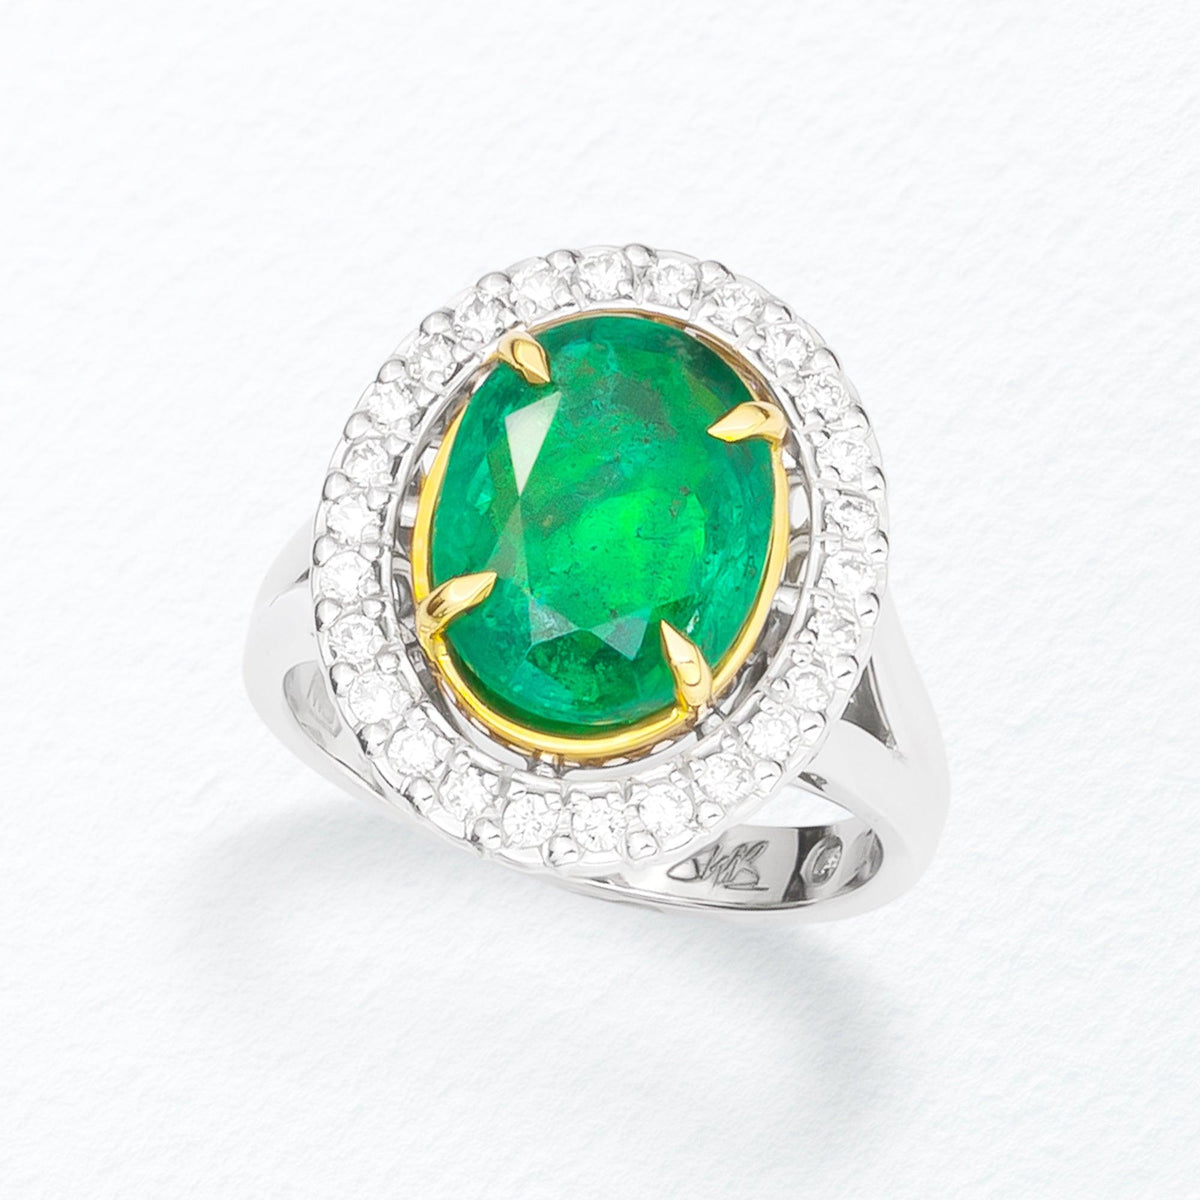 Stuart Bishop Collection Emerald and Diamond Ring in 18ct Yellow and White Gold TDW 0.520 - Wallace Bishop